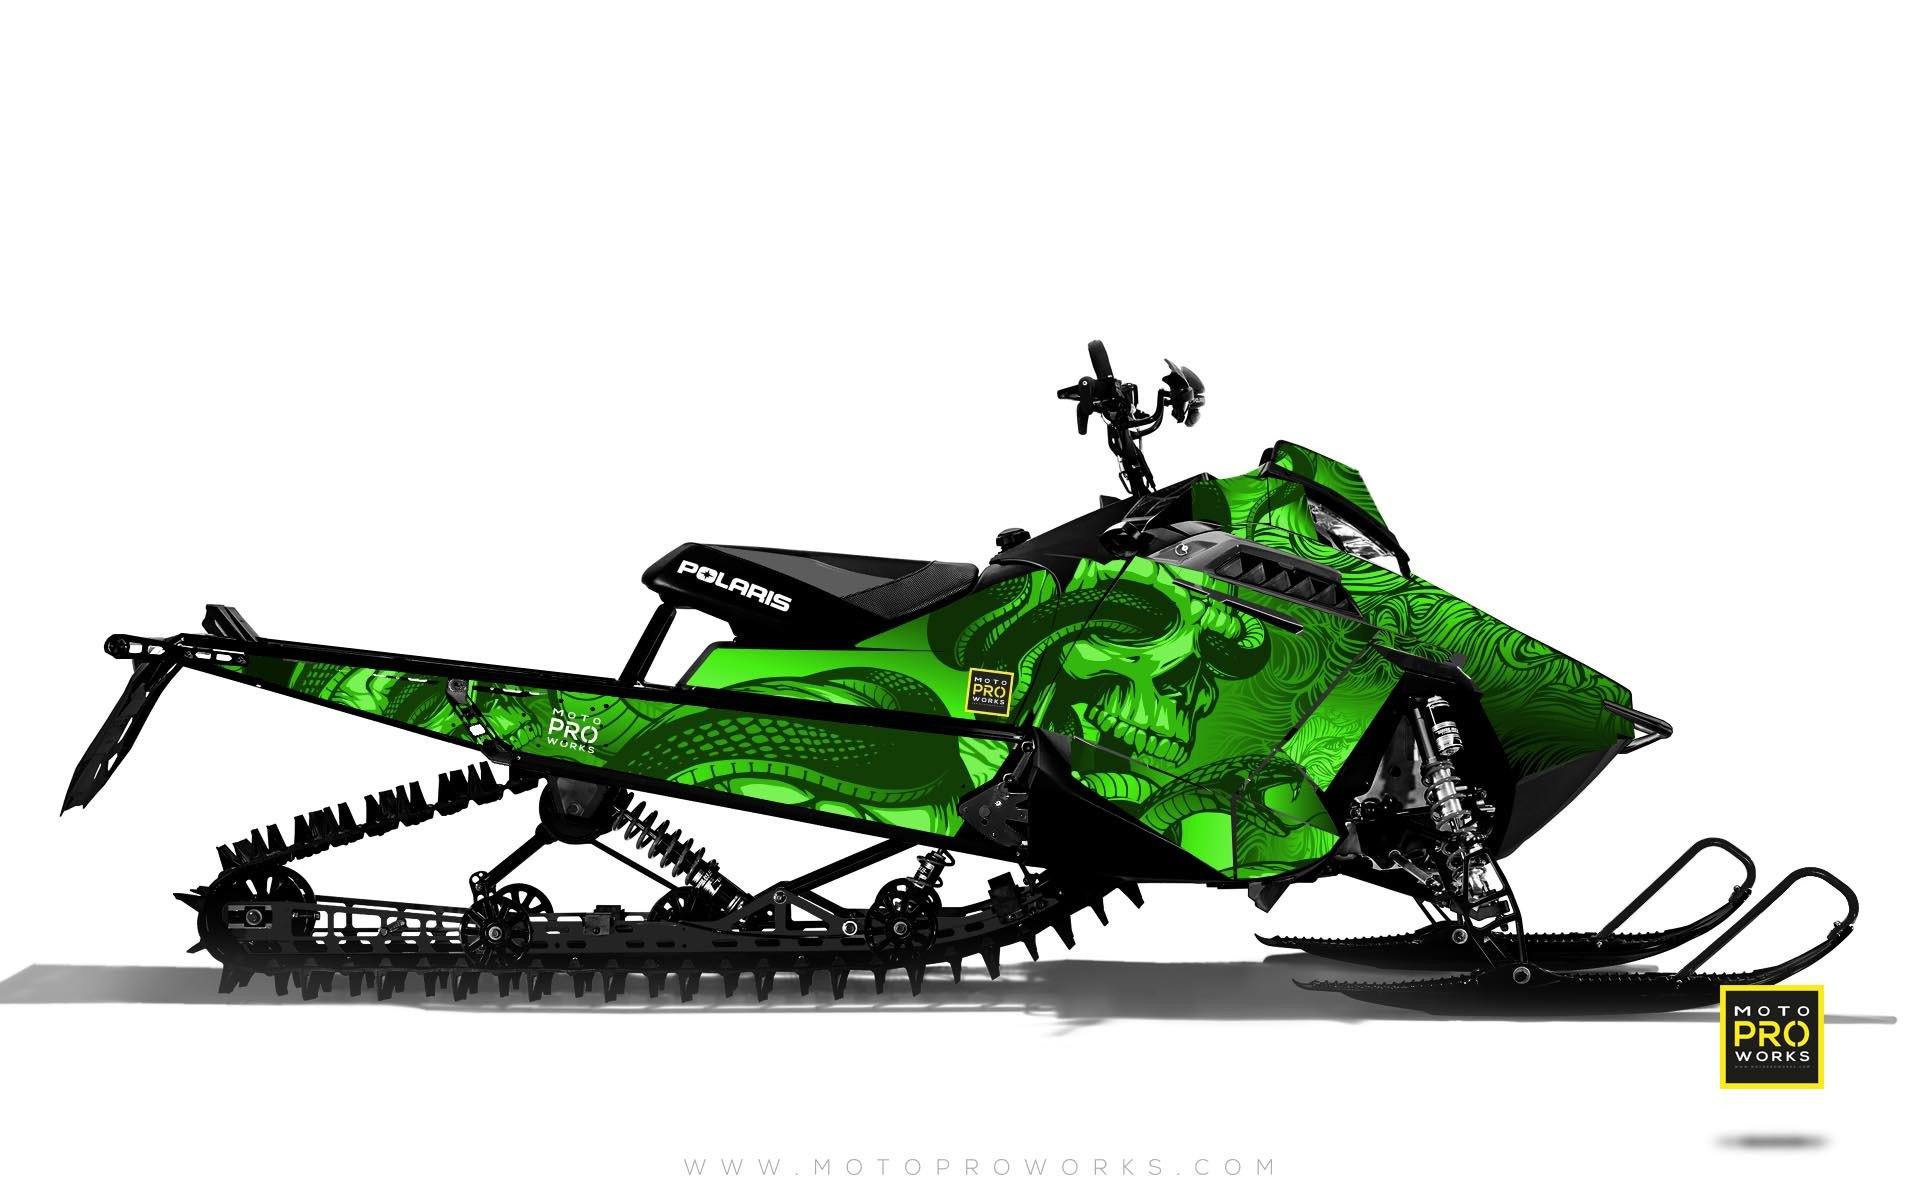 Polaris Graphics - "Ssskully" (green) - MotoProWorks | Decals and Bike Graphic kit